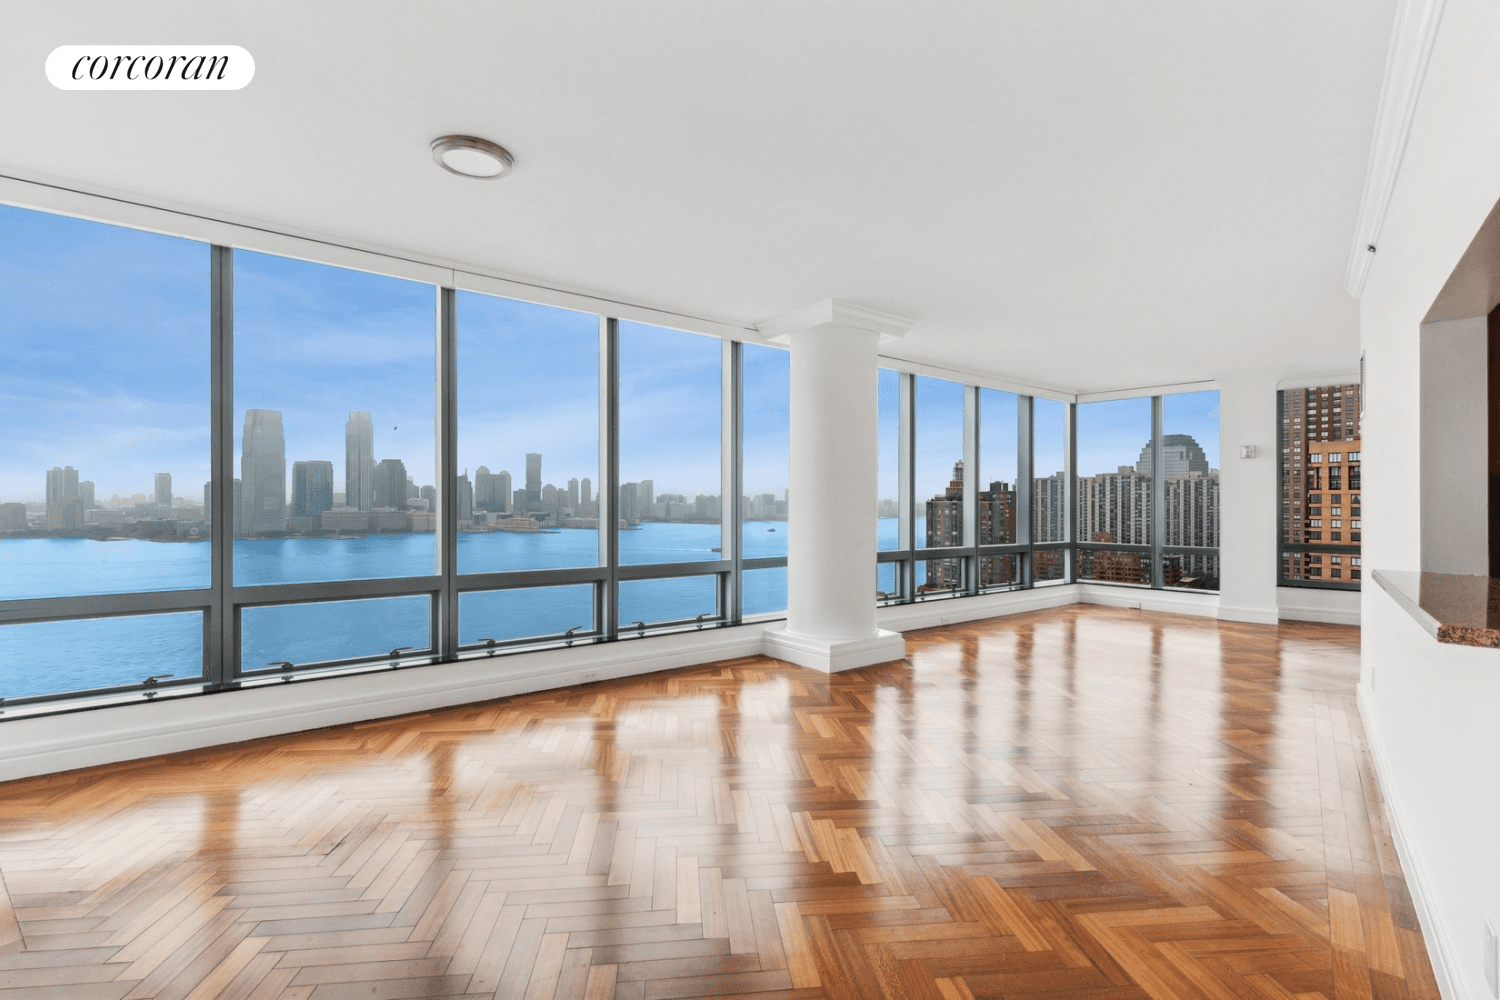 Dramatic, corner four bedroom, four bathroom condo, approx 2, 386 sq ft now available for rent at The Ritz Carlton Residences, Battery Park City.